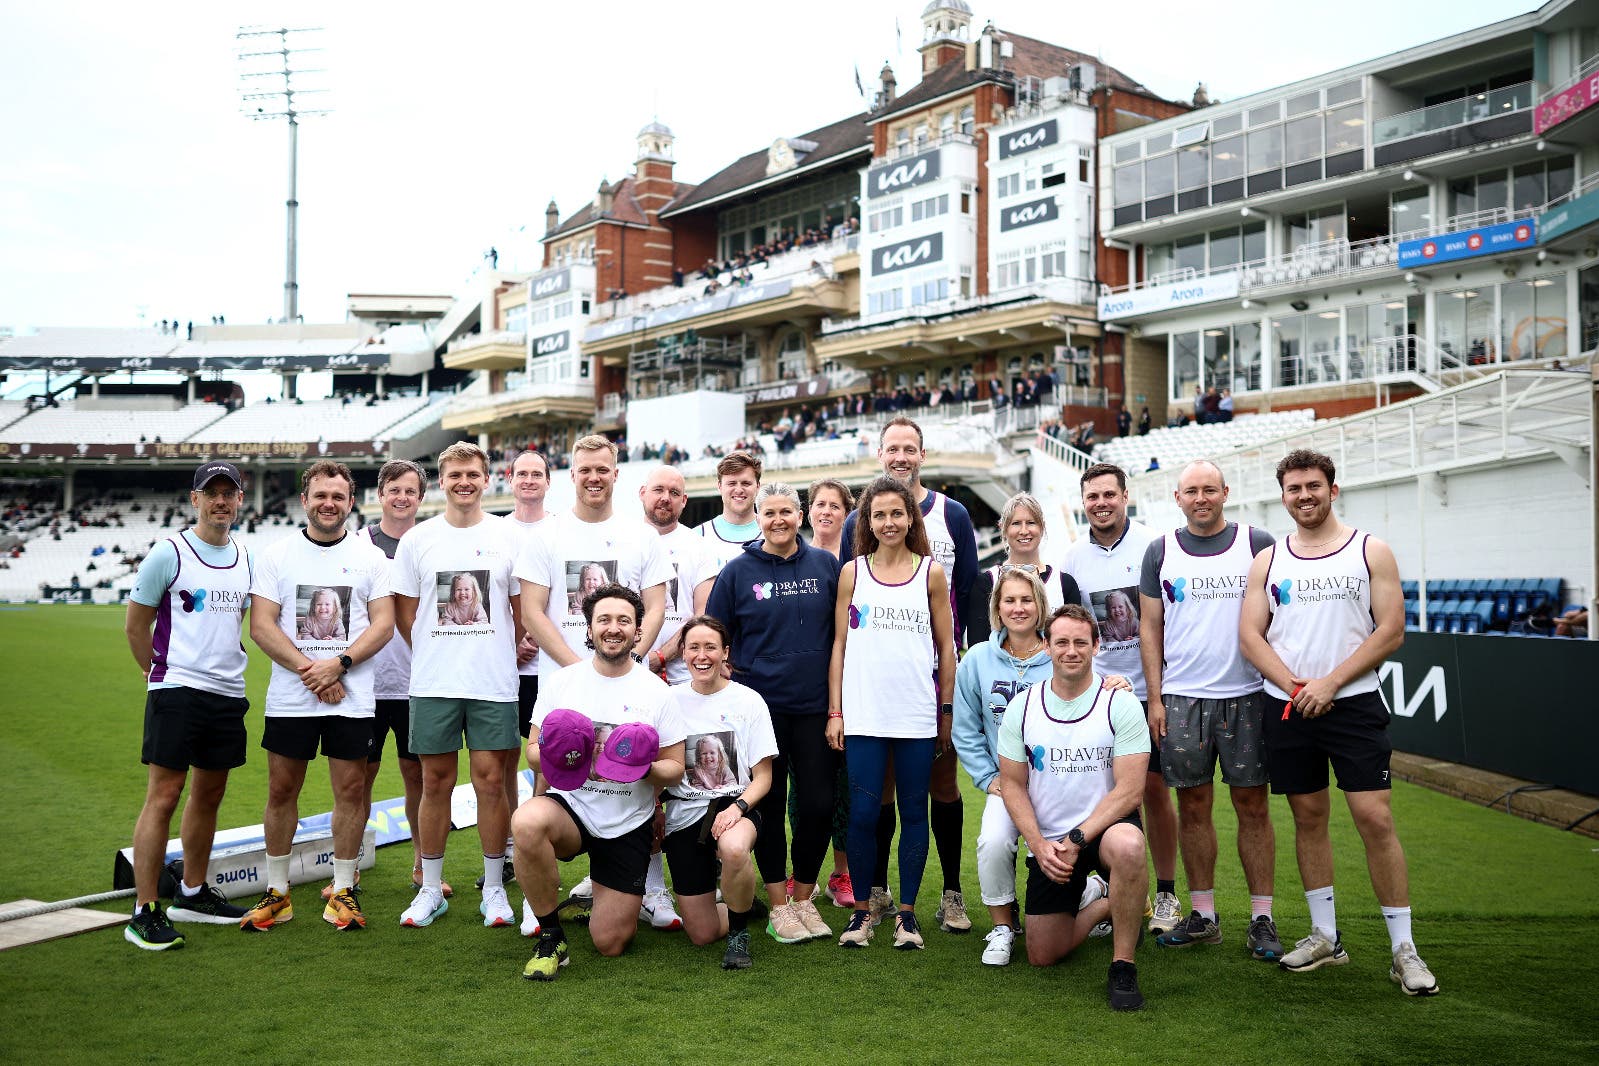 Matt Dunn and wife Jessica led a team of runners from Lord’s to the Kia Oval on Thursday to raise funds for Dravet Syndrome UK (Ben Hoskins/Surrey CCC/Handout)